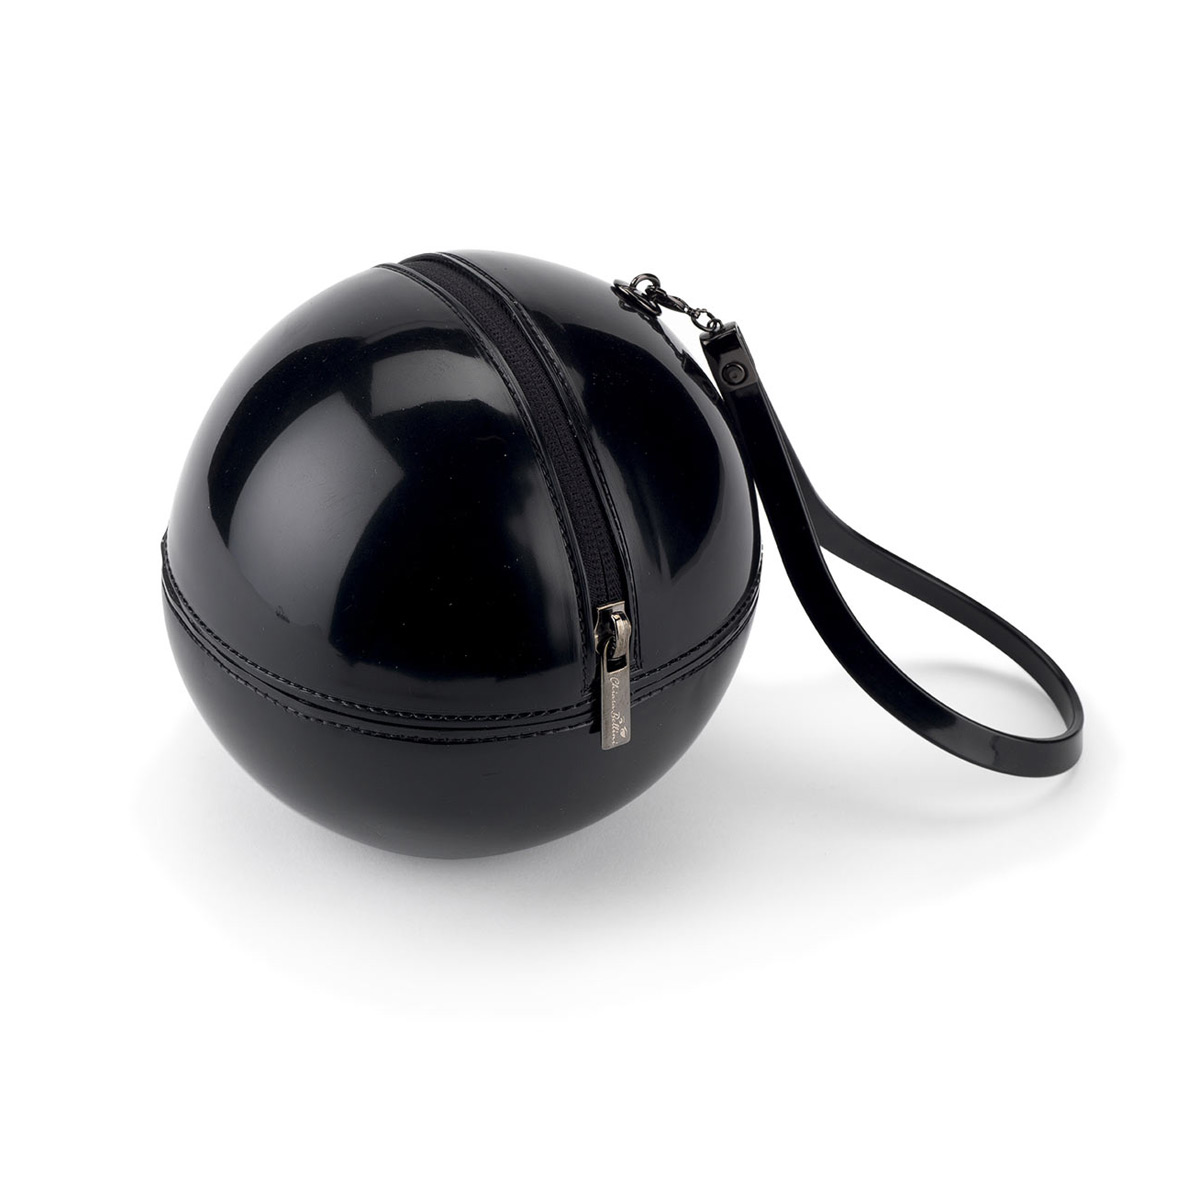 "Rock'n ball" sphere bag in solid colour bright PVC